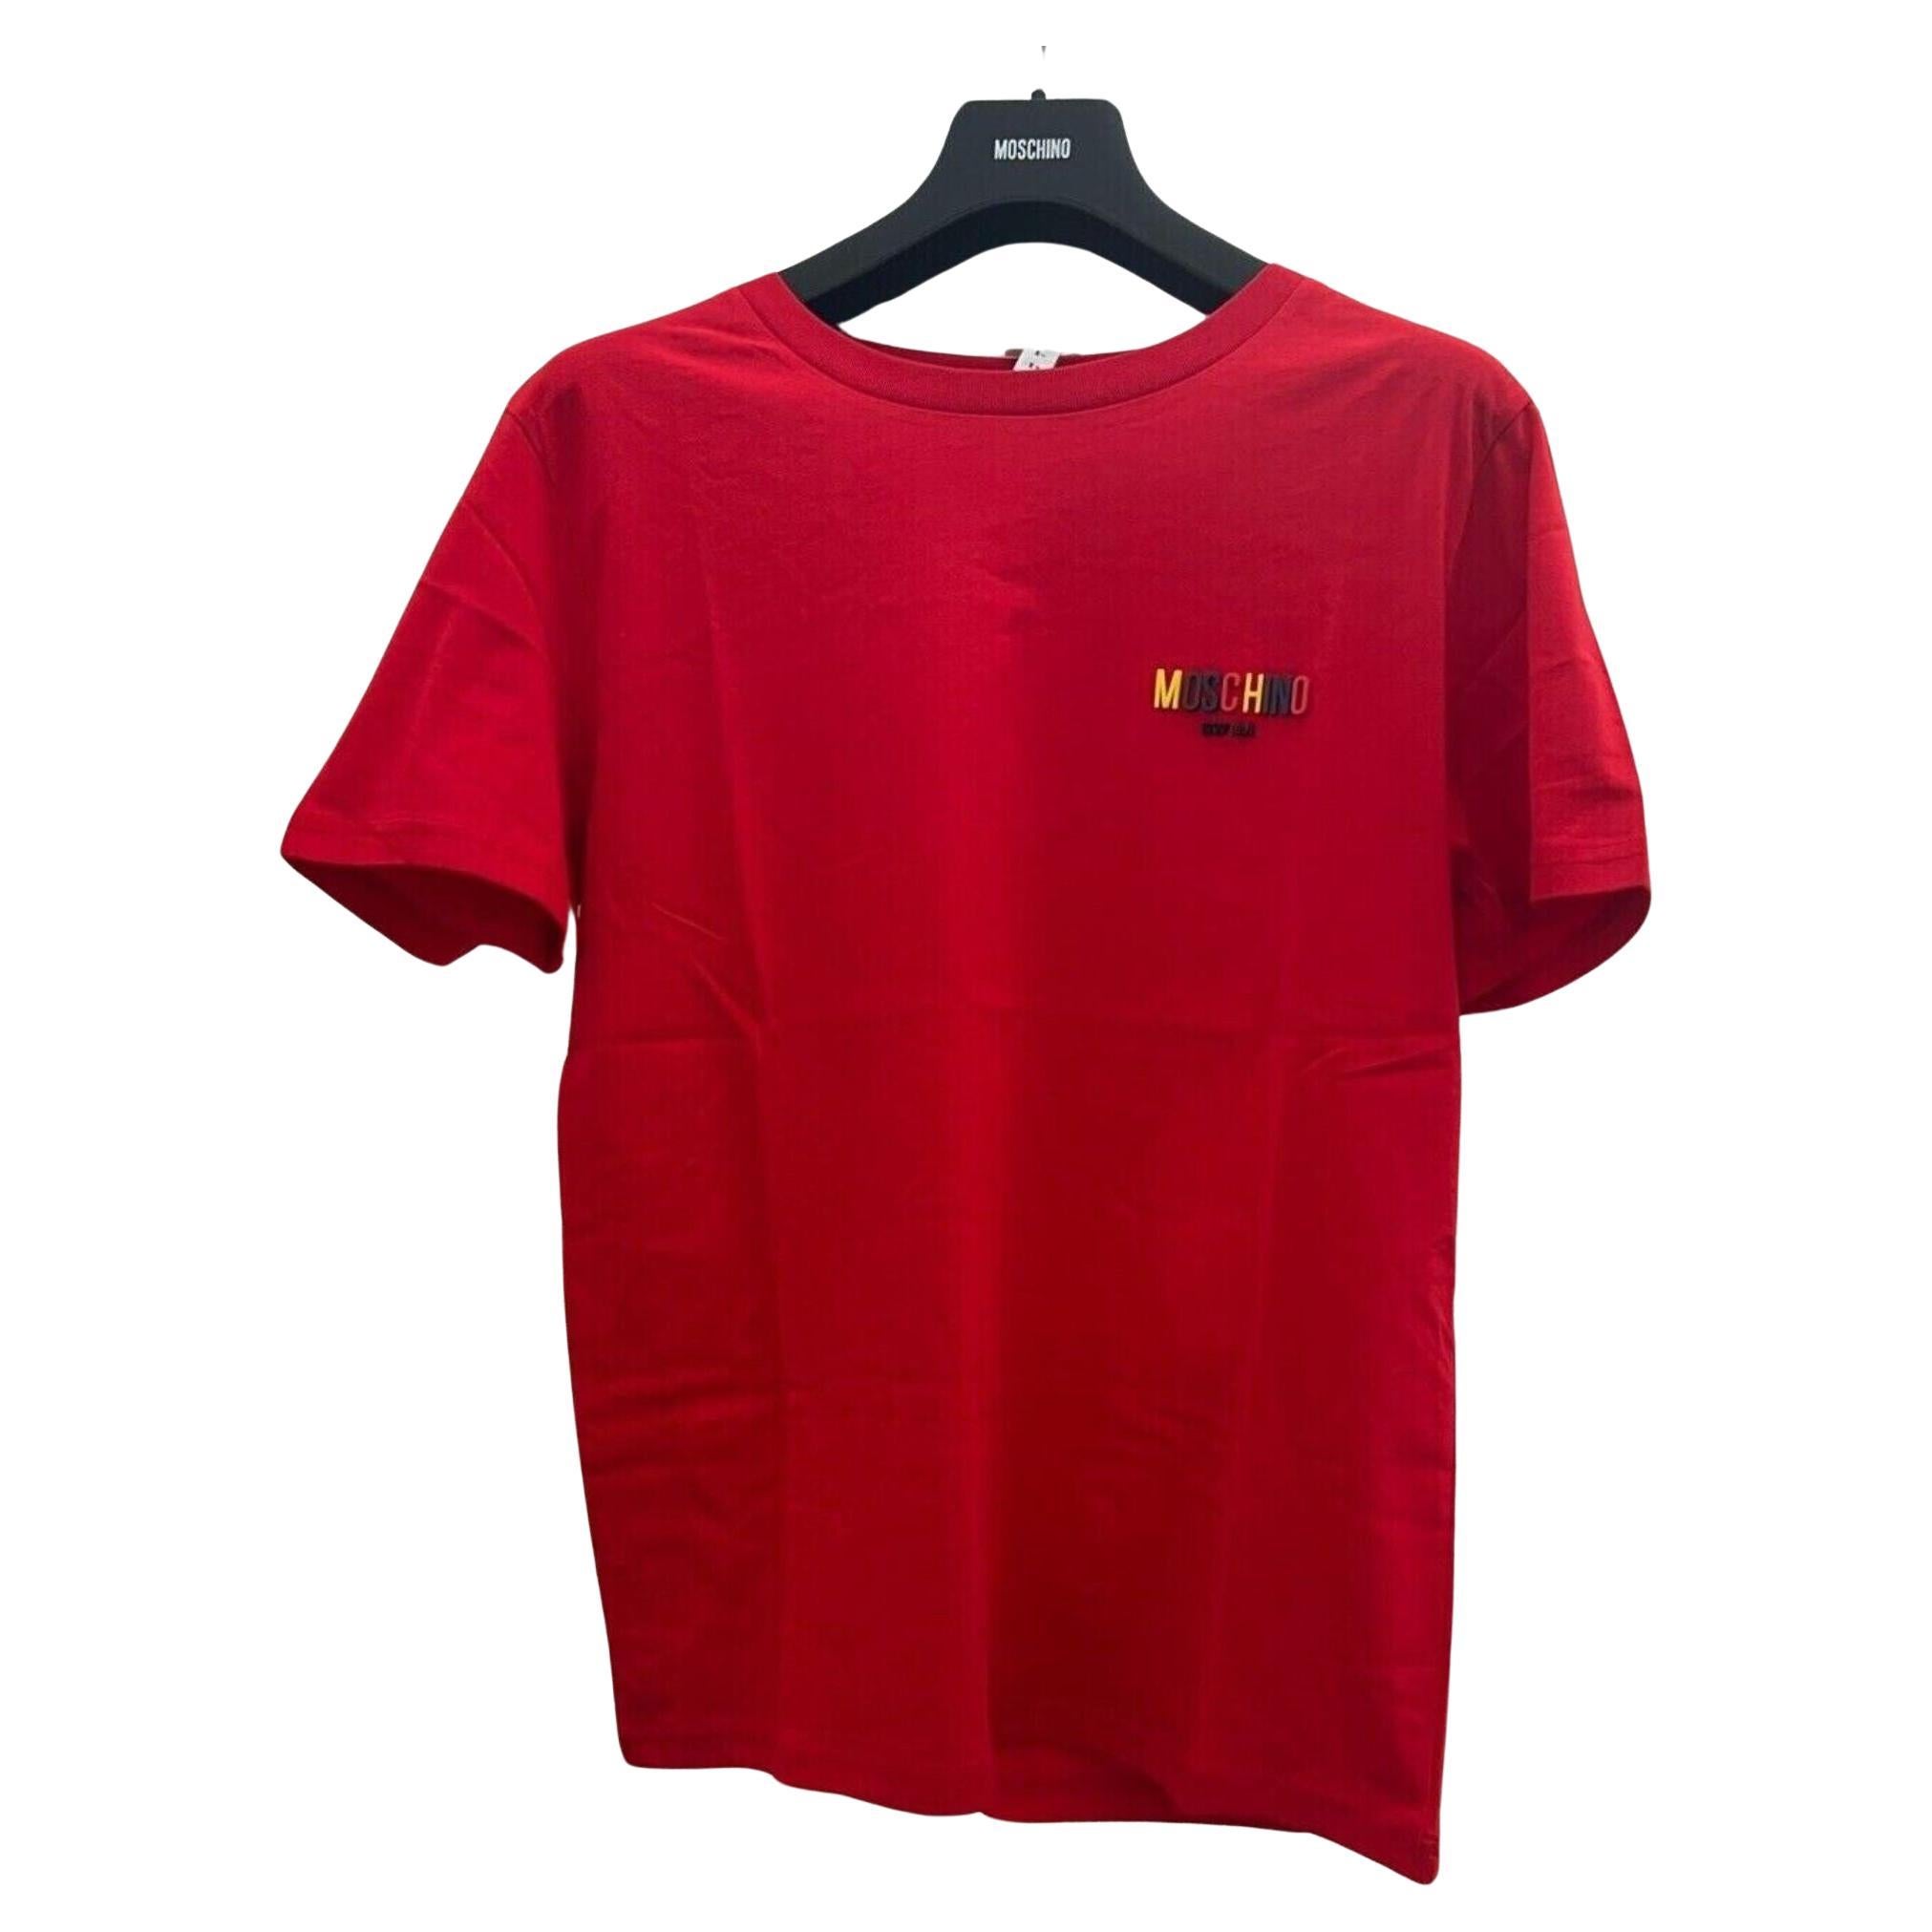 Aw20 Moschino Swim Red T-shirt with 3D Multicolor Logo by Jeremy Scott, Size M For Sale